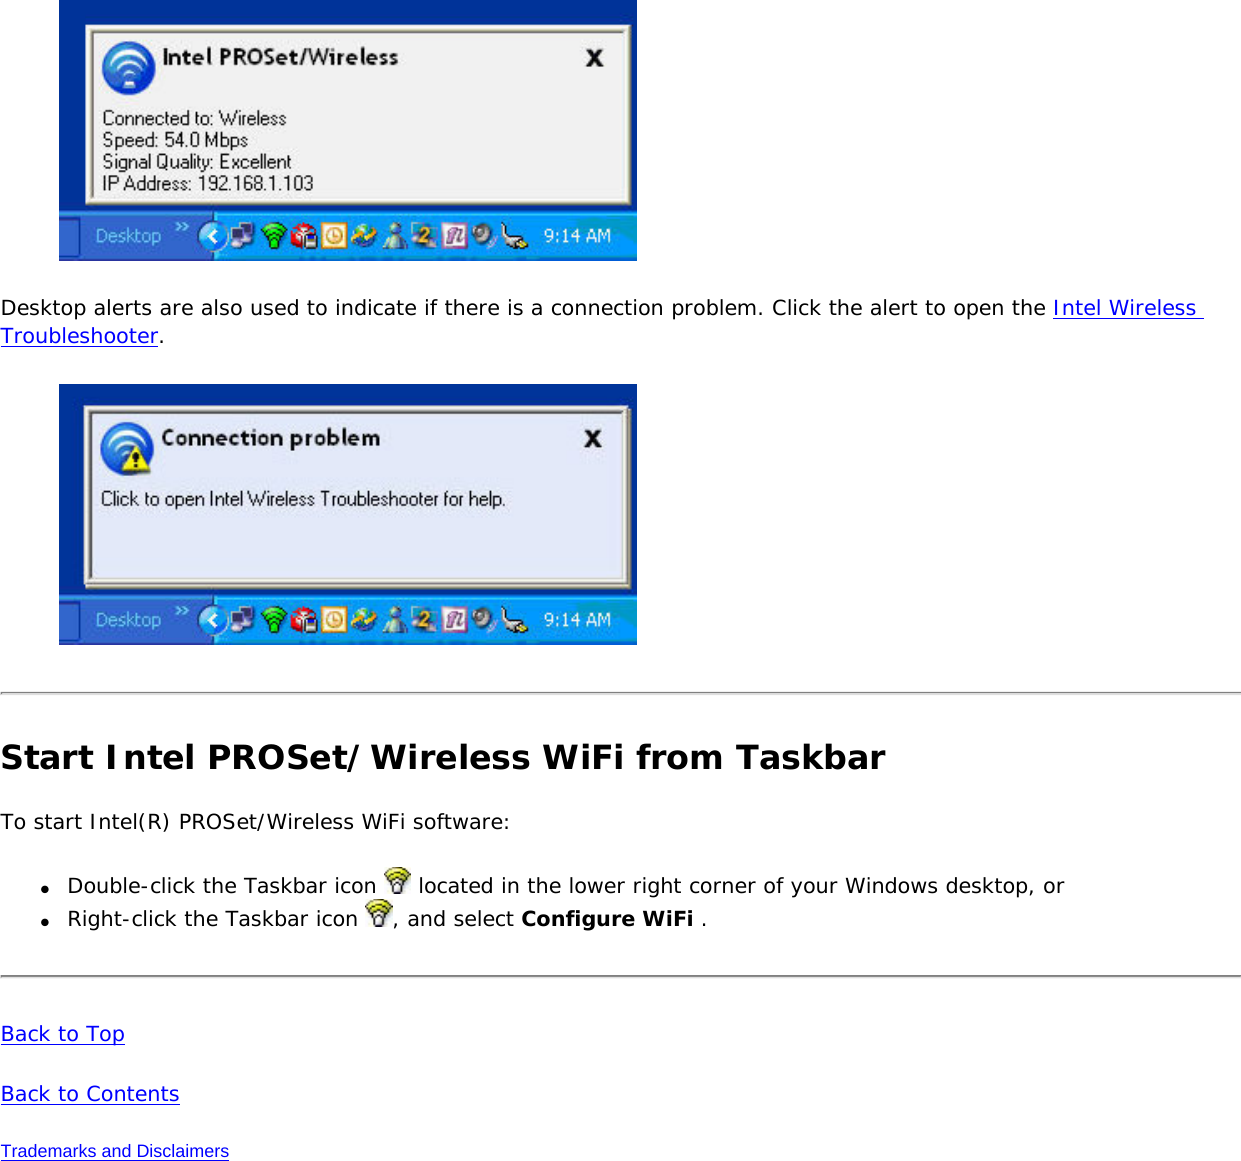  Desktop alerts are also used to indicate if there is a connection problem. Click the alert to open the Intel Wireless Troubleshooter.  Start Intel PROSet/Wireless WiFi from TaskbarTo start Intel(R) PROSet/Wireless WiFi software: ●     Double-click the Taskbar icon   located in the lower right corner of your Windows desktop, or ●     Right-click the Taskbar icon  , and select Configure WiFi .Back to TopBack to ContentsTrademarks and Disclaimers